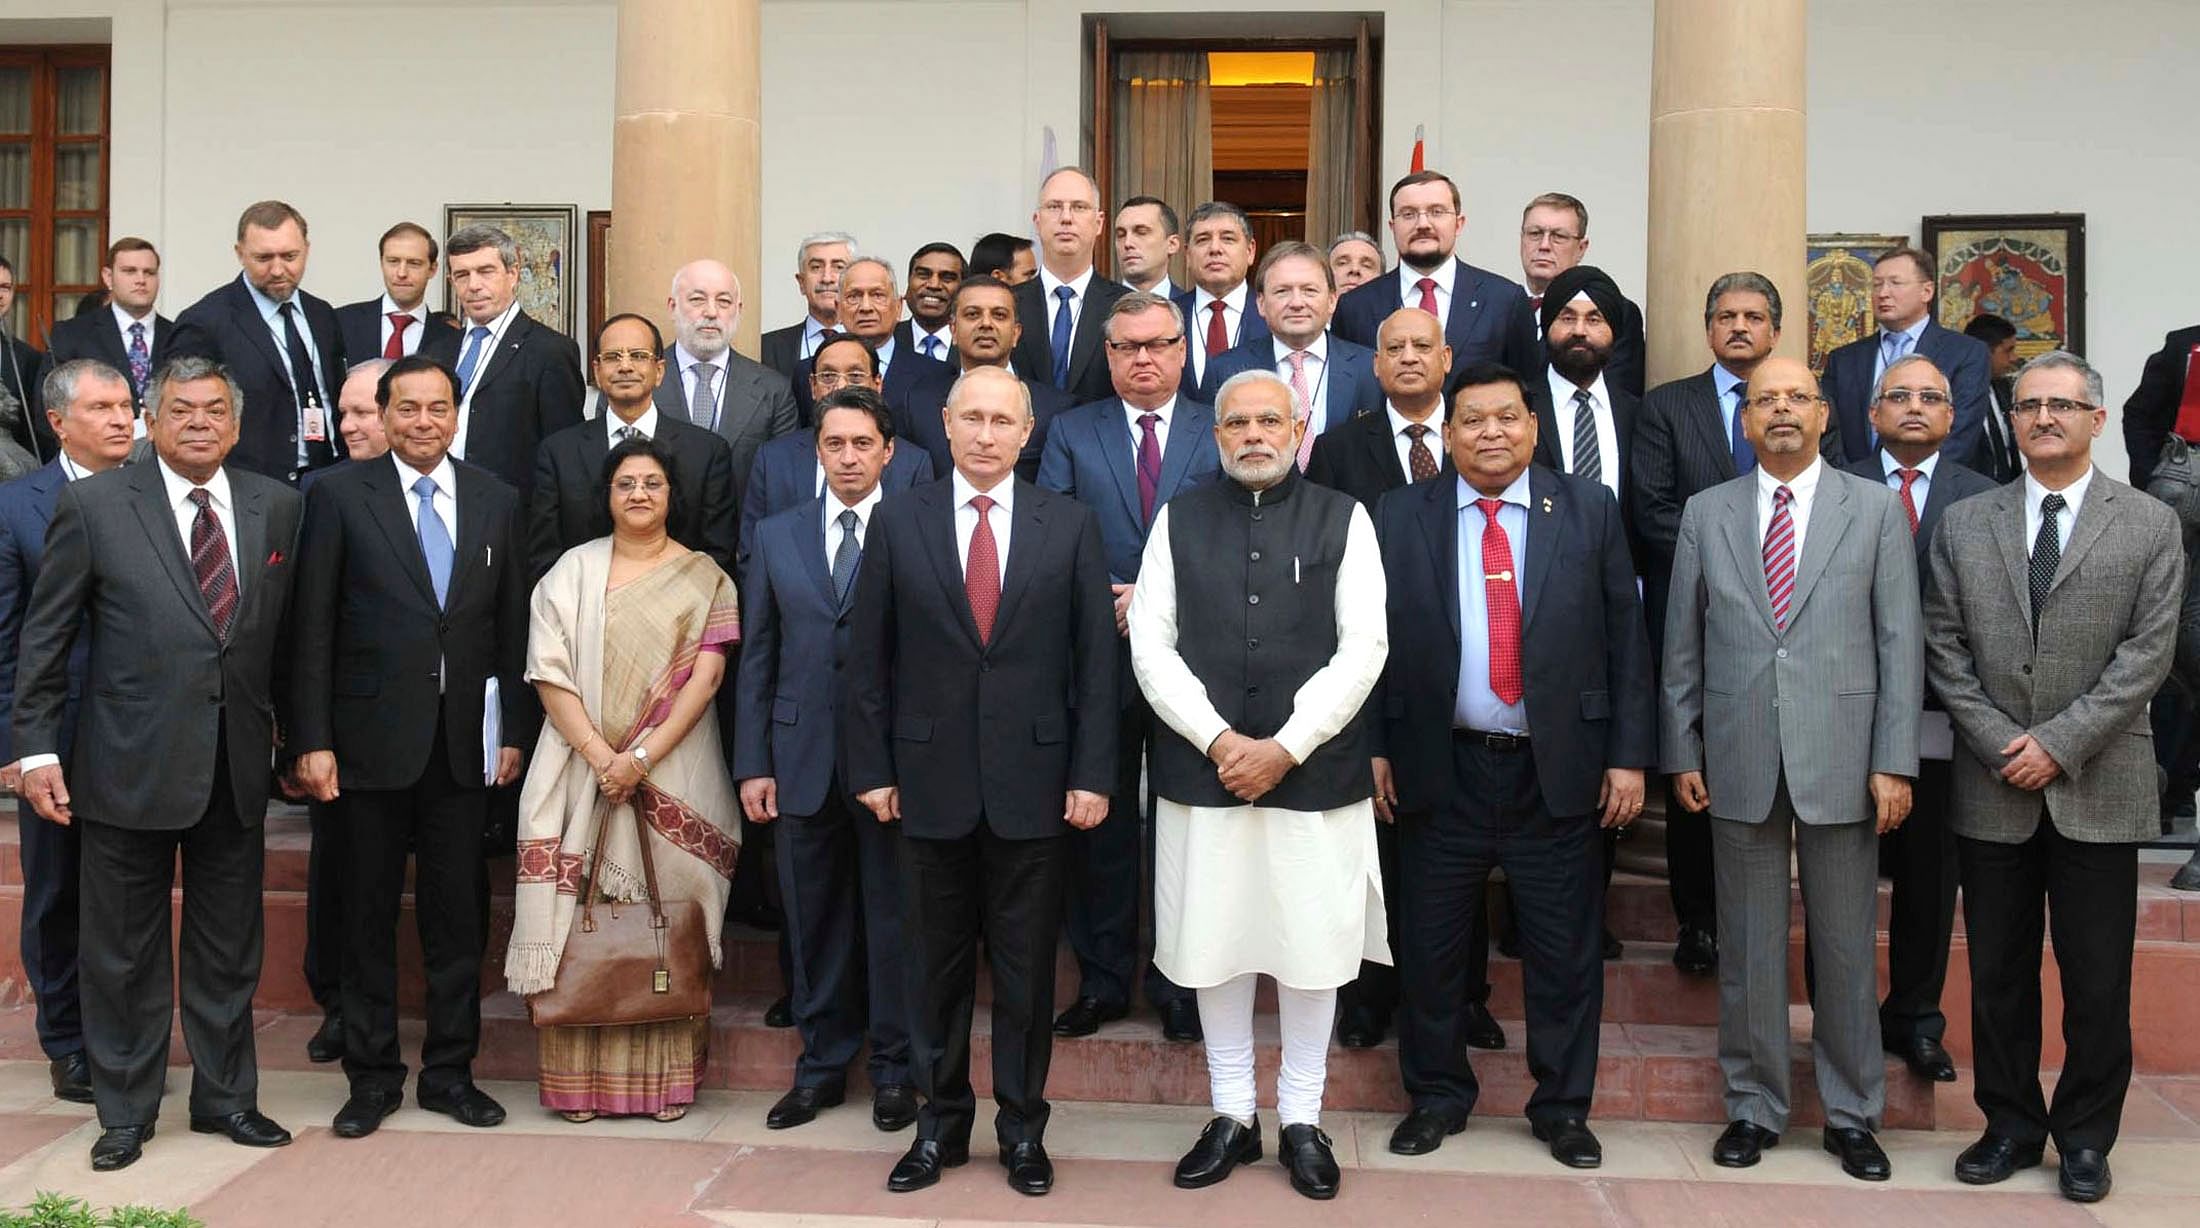 Russian President Vladimir Putin (centre L, first row) and Indian Prime Minister Narendra Modi (centre R, first row) pose for pictures with a group of CEOs after their interaction in New Delhi, in this December 11, 2014 handout picture courtesy of India's Press Information Bureau. Photo: Reuters.